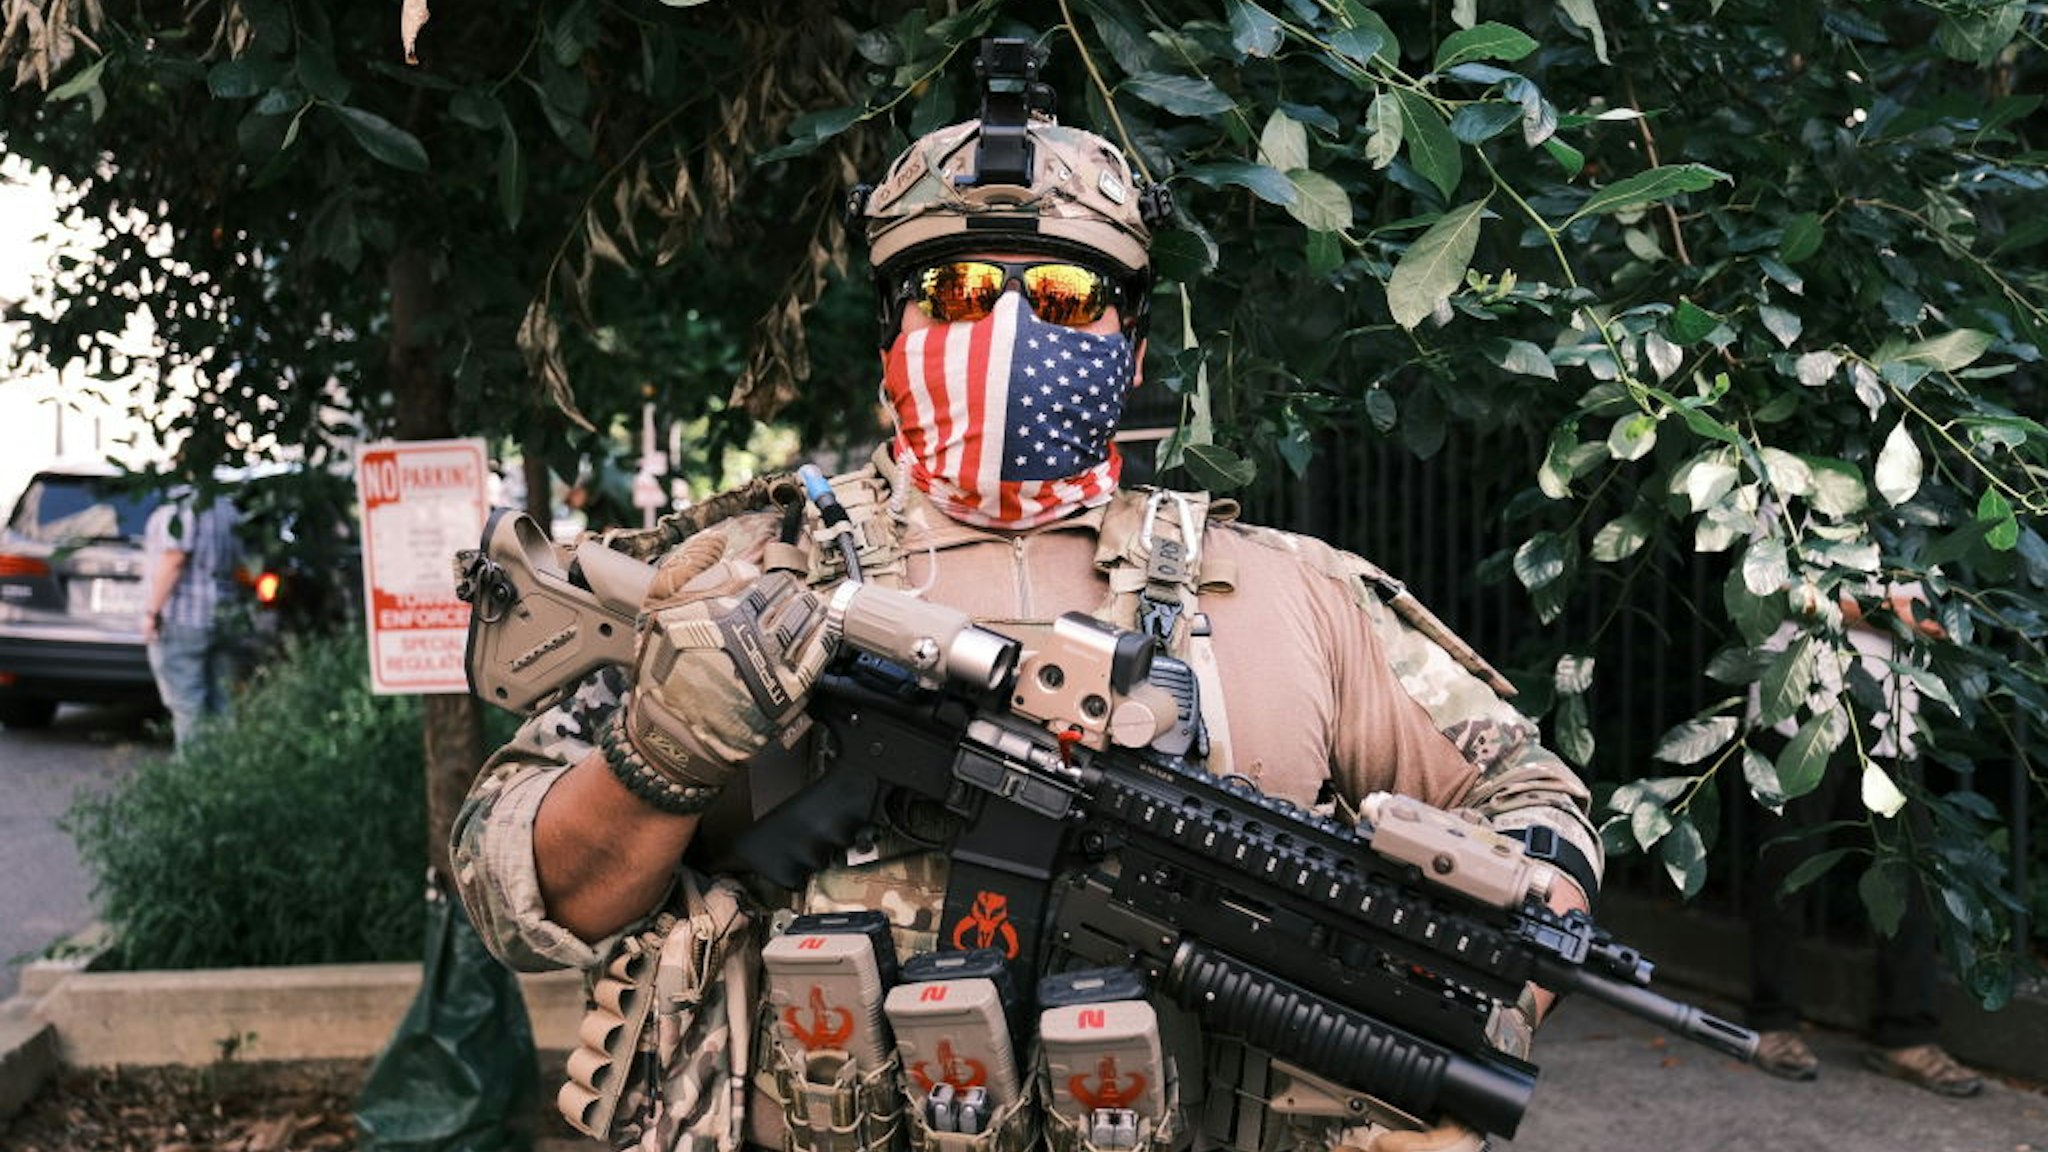 RICHMOND, VA - JULY 04: A man in full military gear pose for photo holding a gun during an open carry protest on July 4, 2020 in Richmond, Virginia. People attended an event in Virginia tagged "Stand with Virginia, Support the 2nd Amendment". (Photo by Eze Amos/Getty Images)